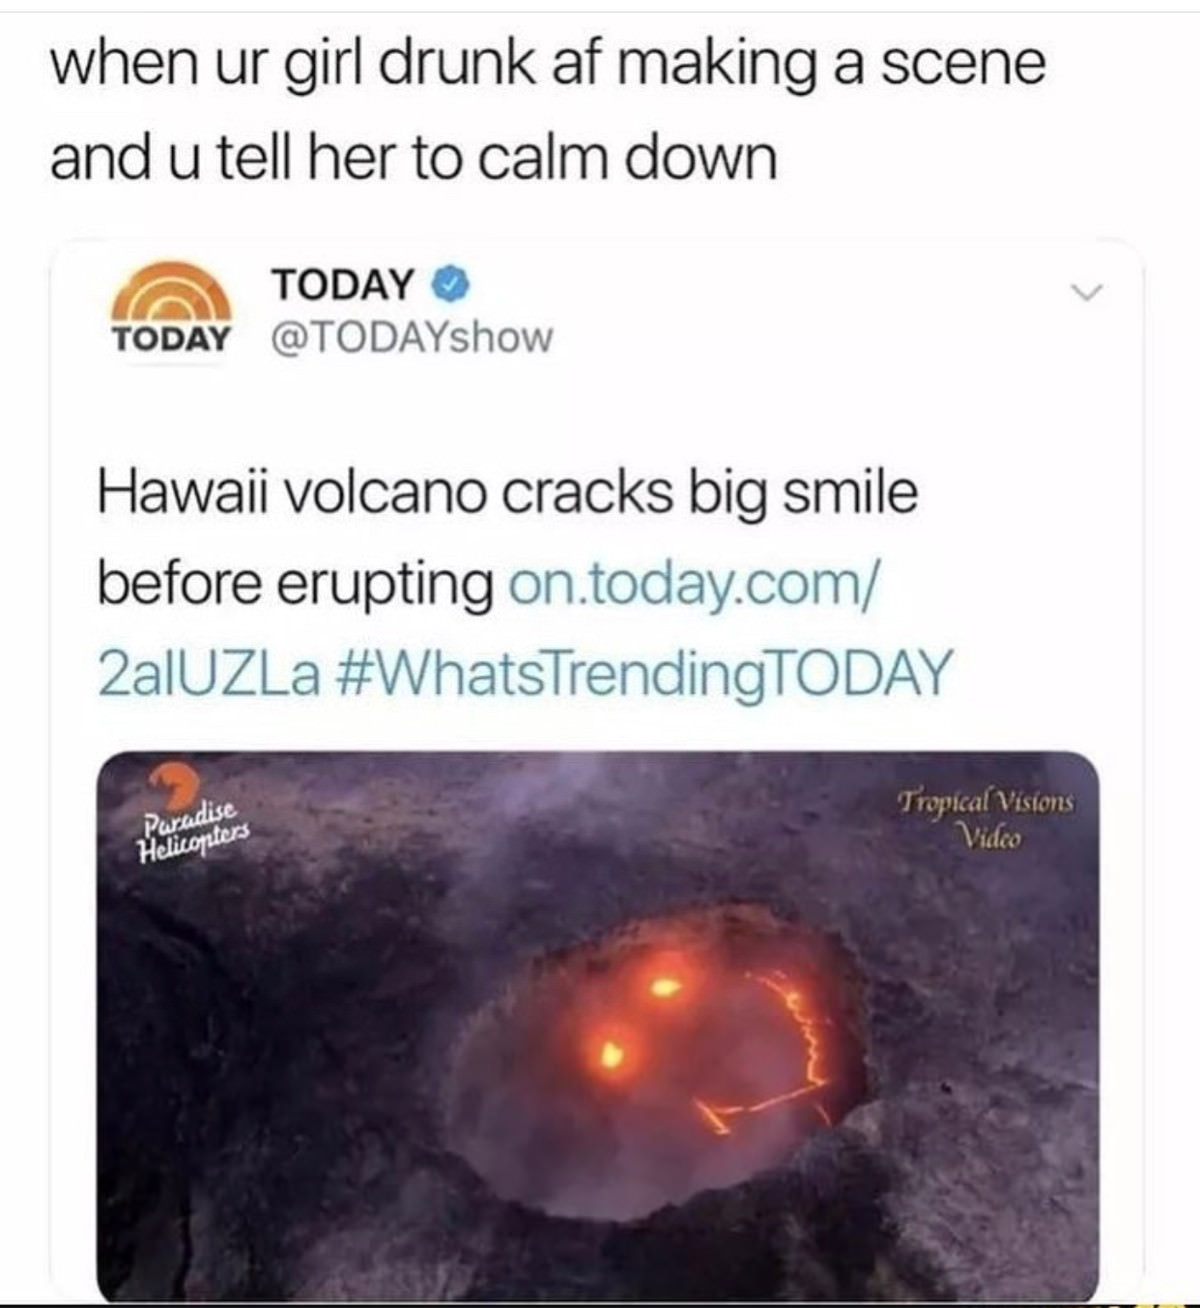 tell her to calm down meme - when ur girl drunk af making a scene and u tell her to calm down Today Today Hawaii volcano cracks big smile before erupting on.today.com 2aIUZLa Tropical Visions Video furudise Helicopters